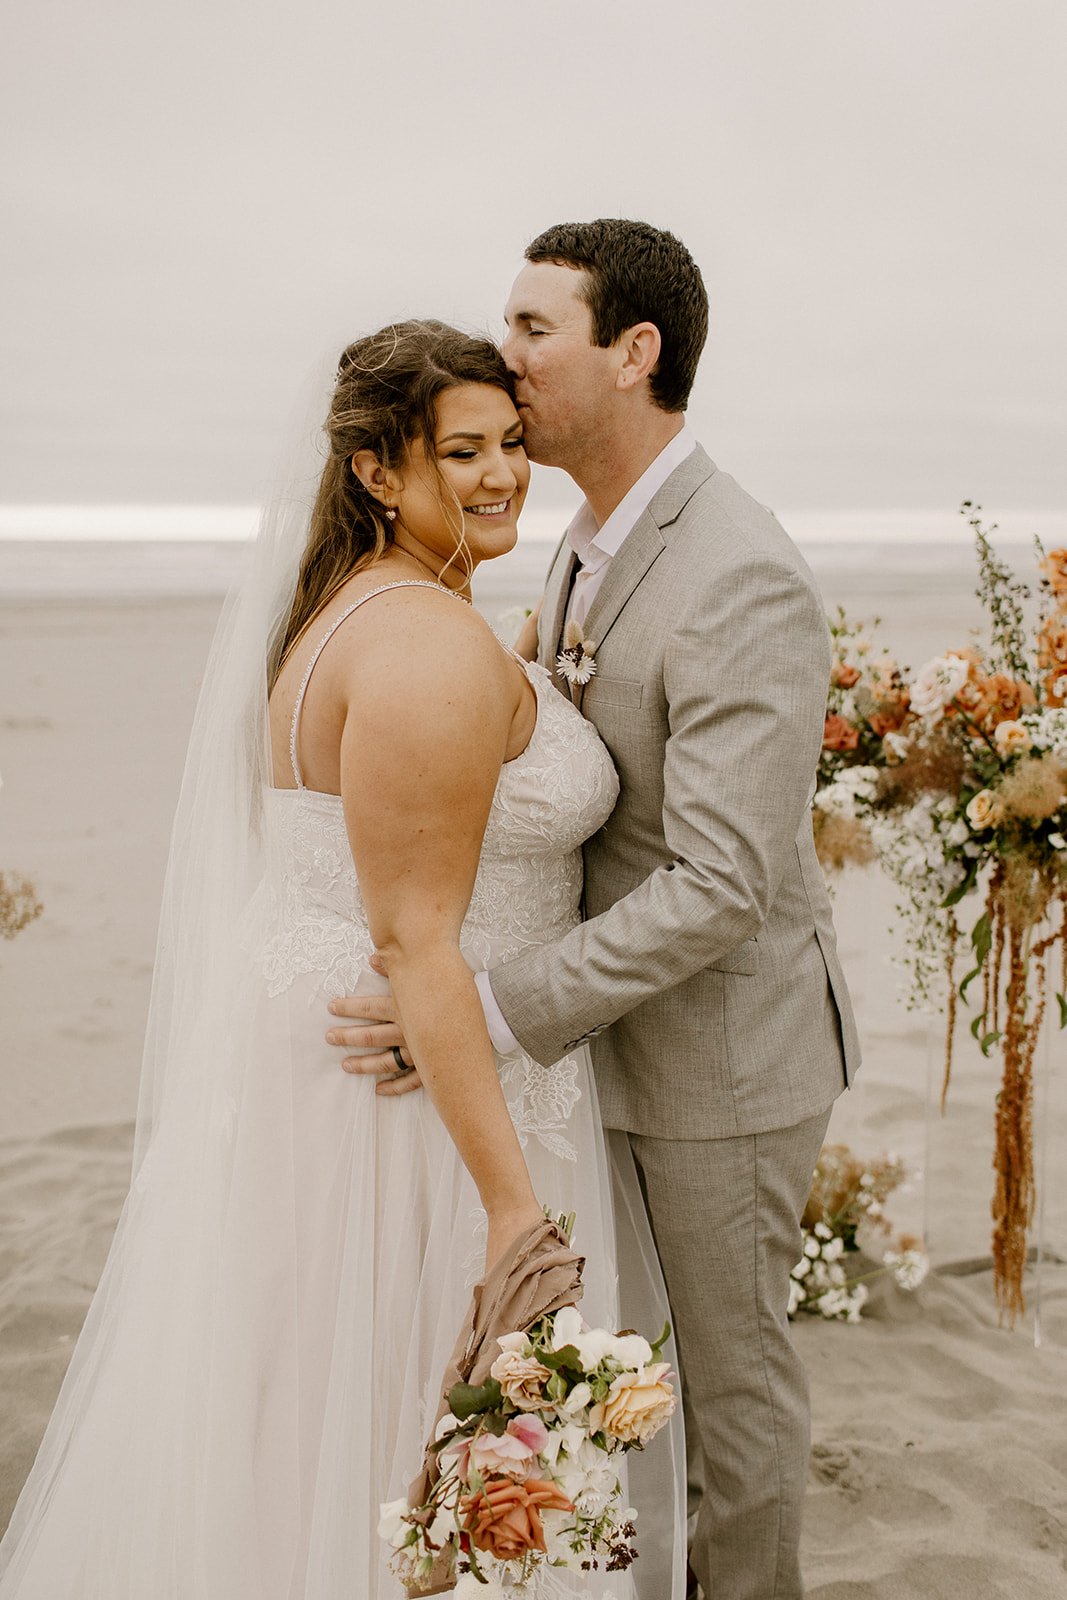 groom kissing bride on the temple as she looks down at her bouquet while standing on the beach in coastal washington